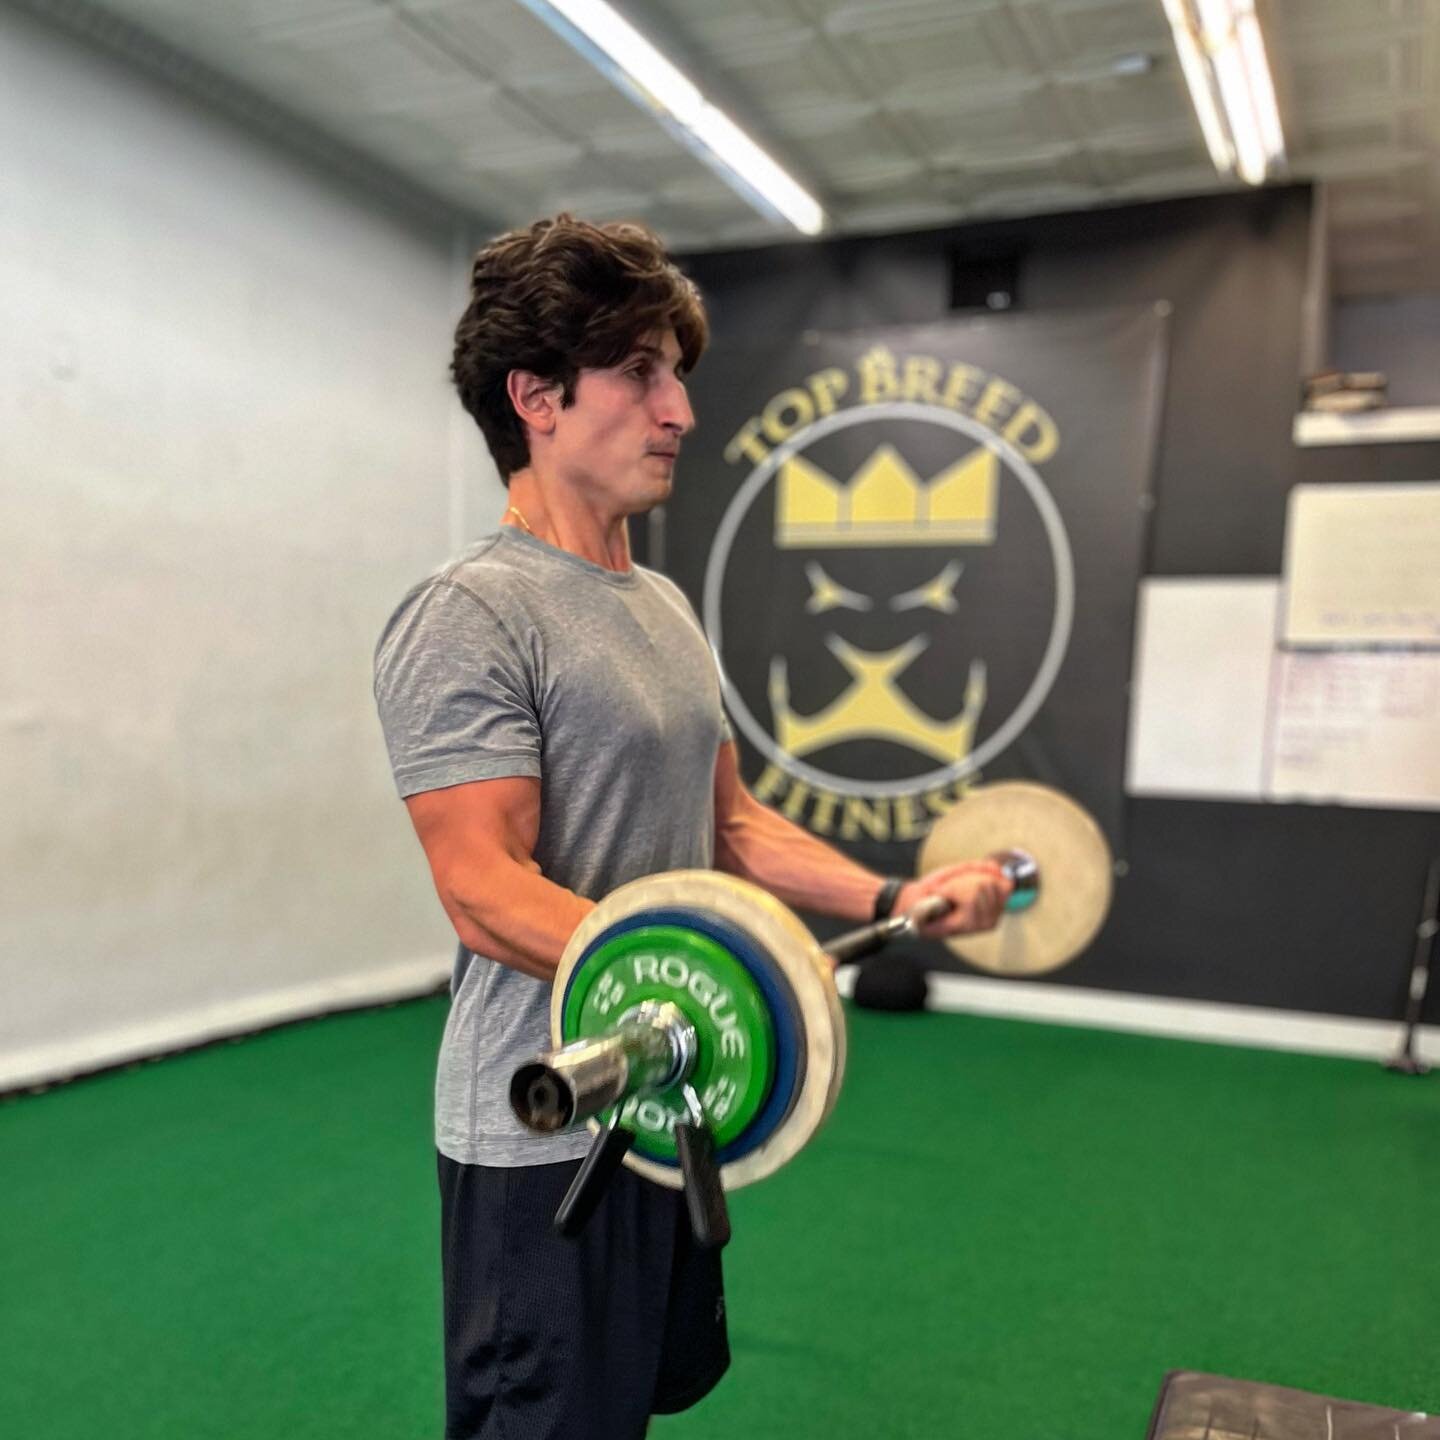 Christian here repping out some curls. Christian is huge w/ form which I love as everyone who trains with me knows I&rsquo;m huge on &ldquo;quality over quantity&rdquo;. He&rsquo;s always focusing on his pace and posture. Great work mannn keep it up!